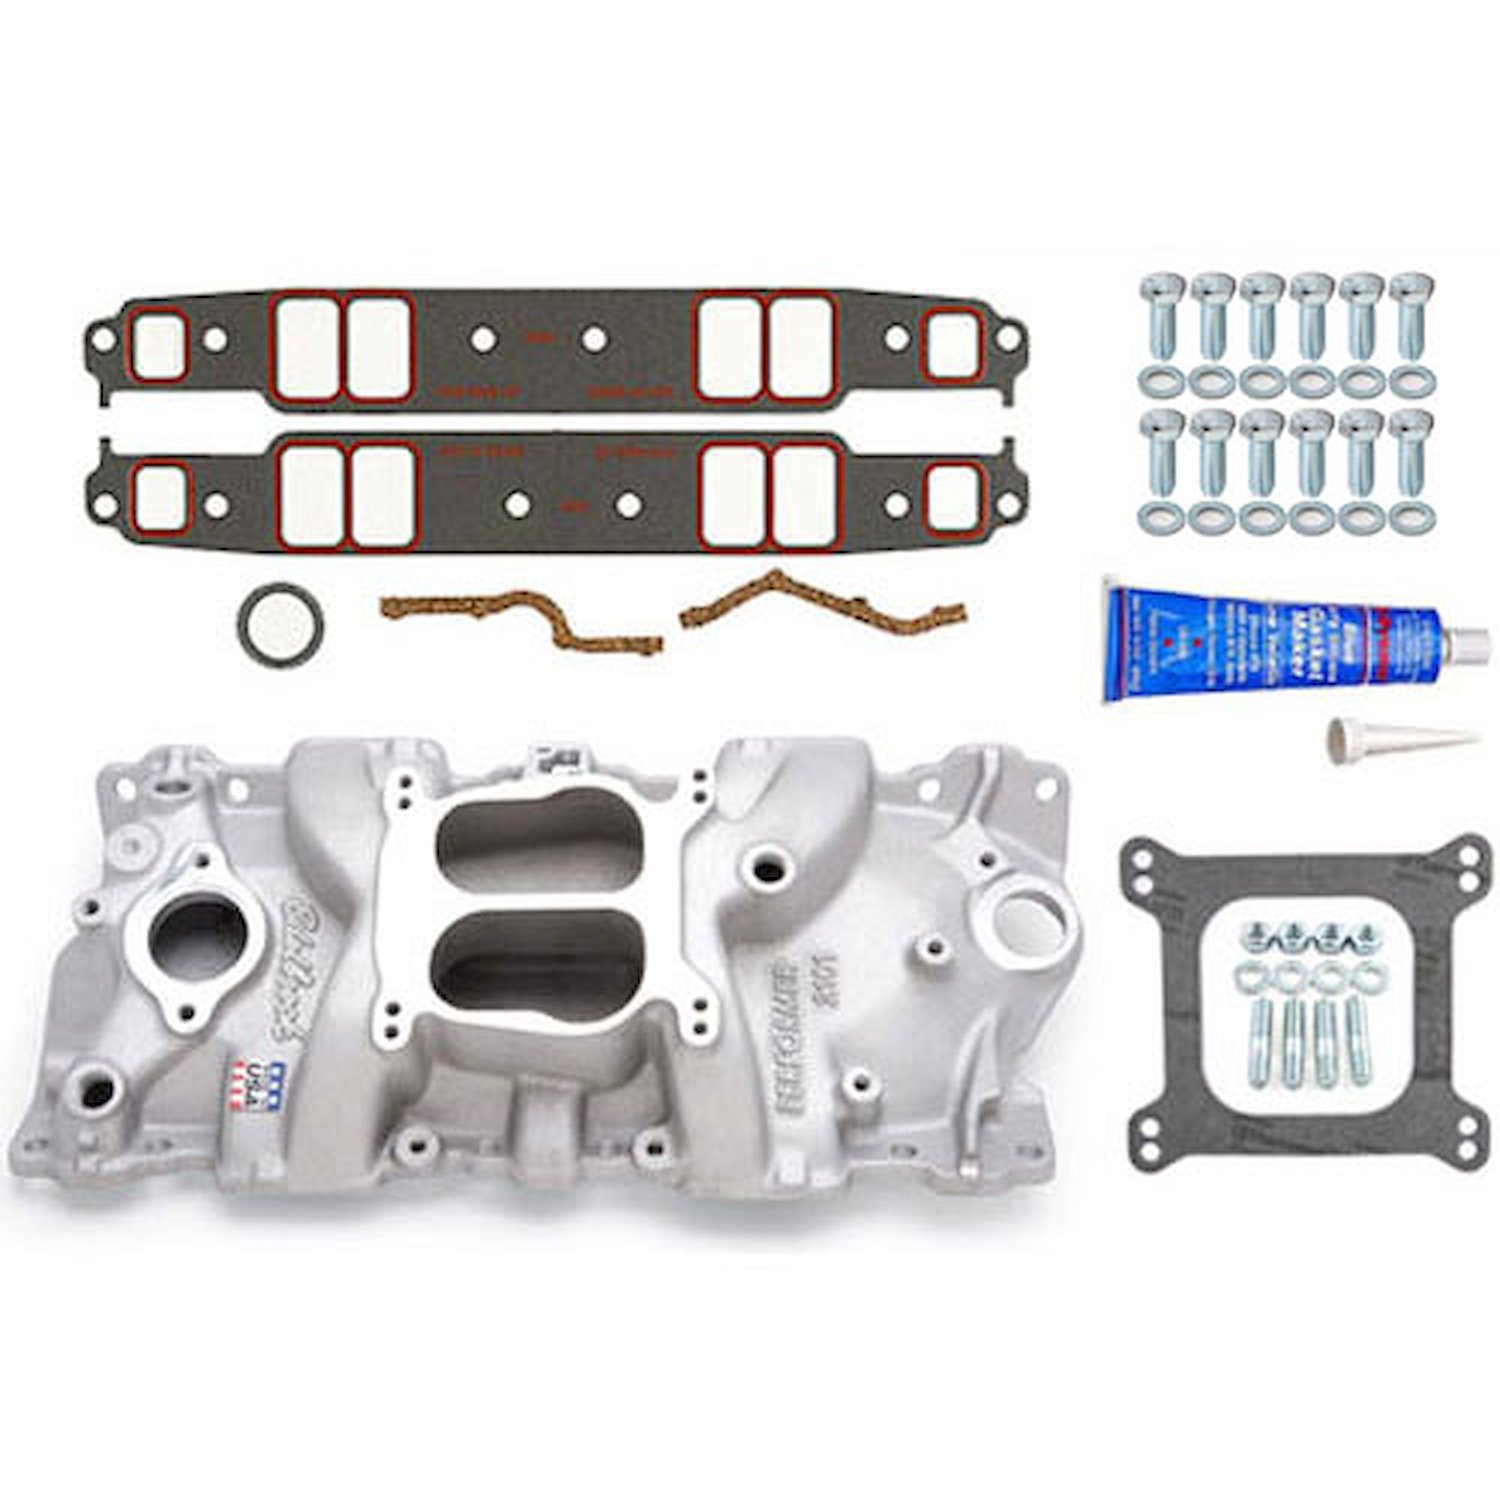 Performer Intake Manifold for Small Block Chevy with